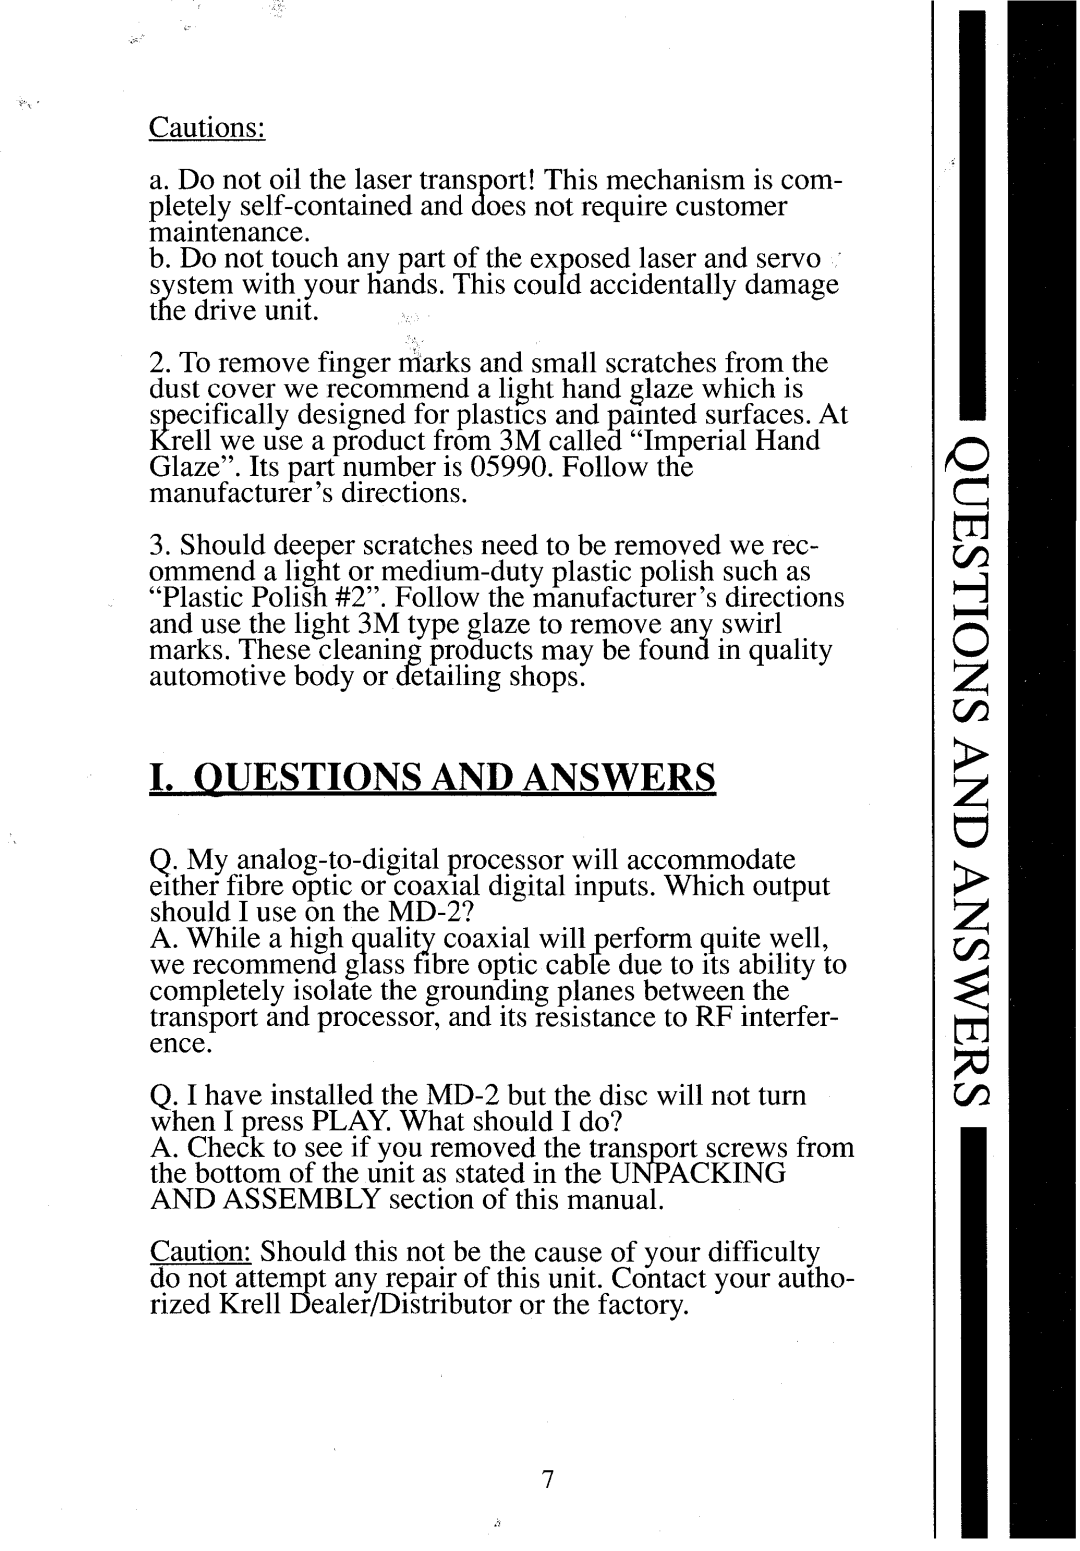 Krell Industries MD2 manual I. Questions And Answers 